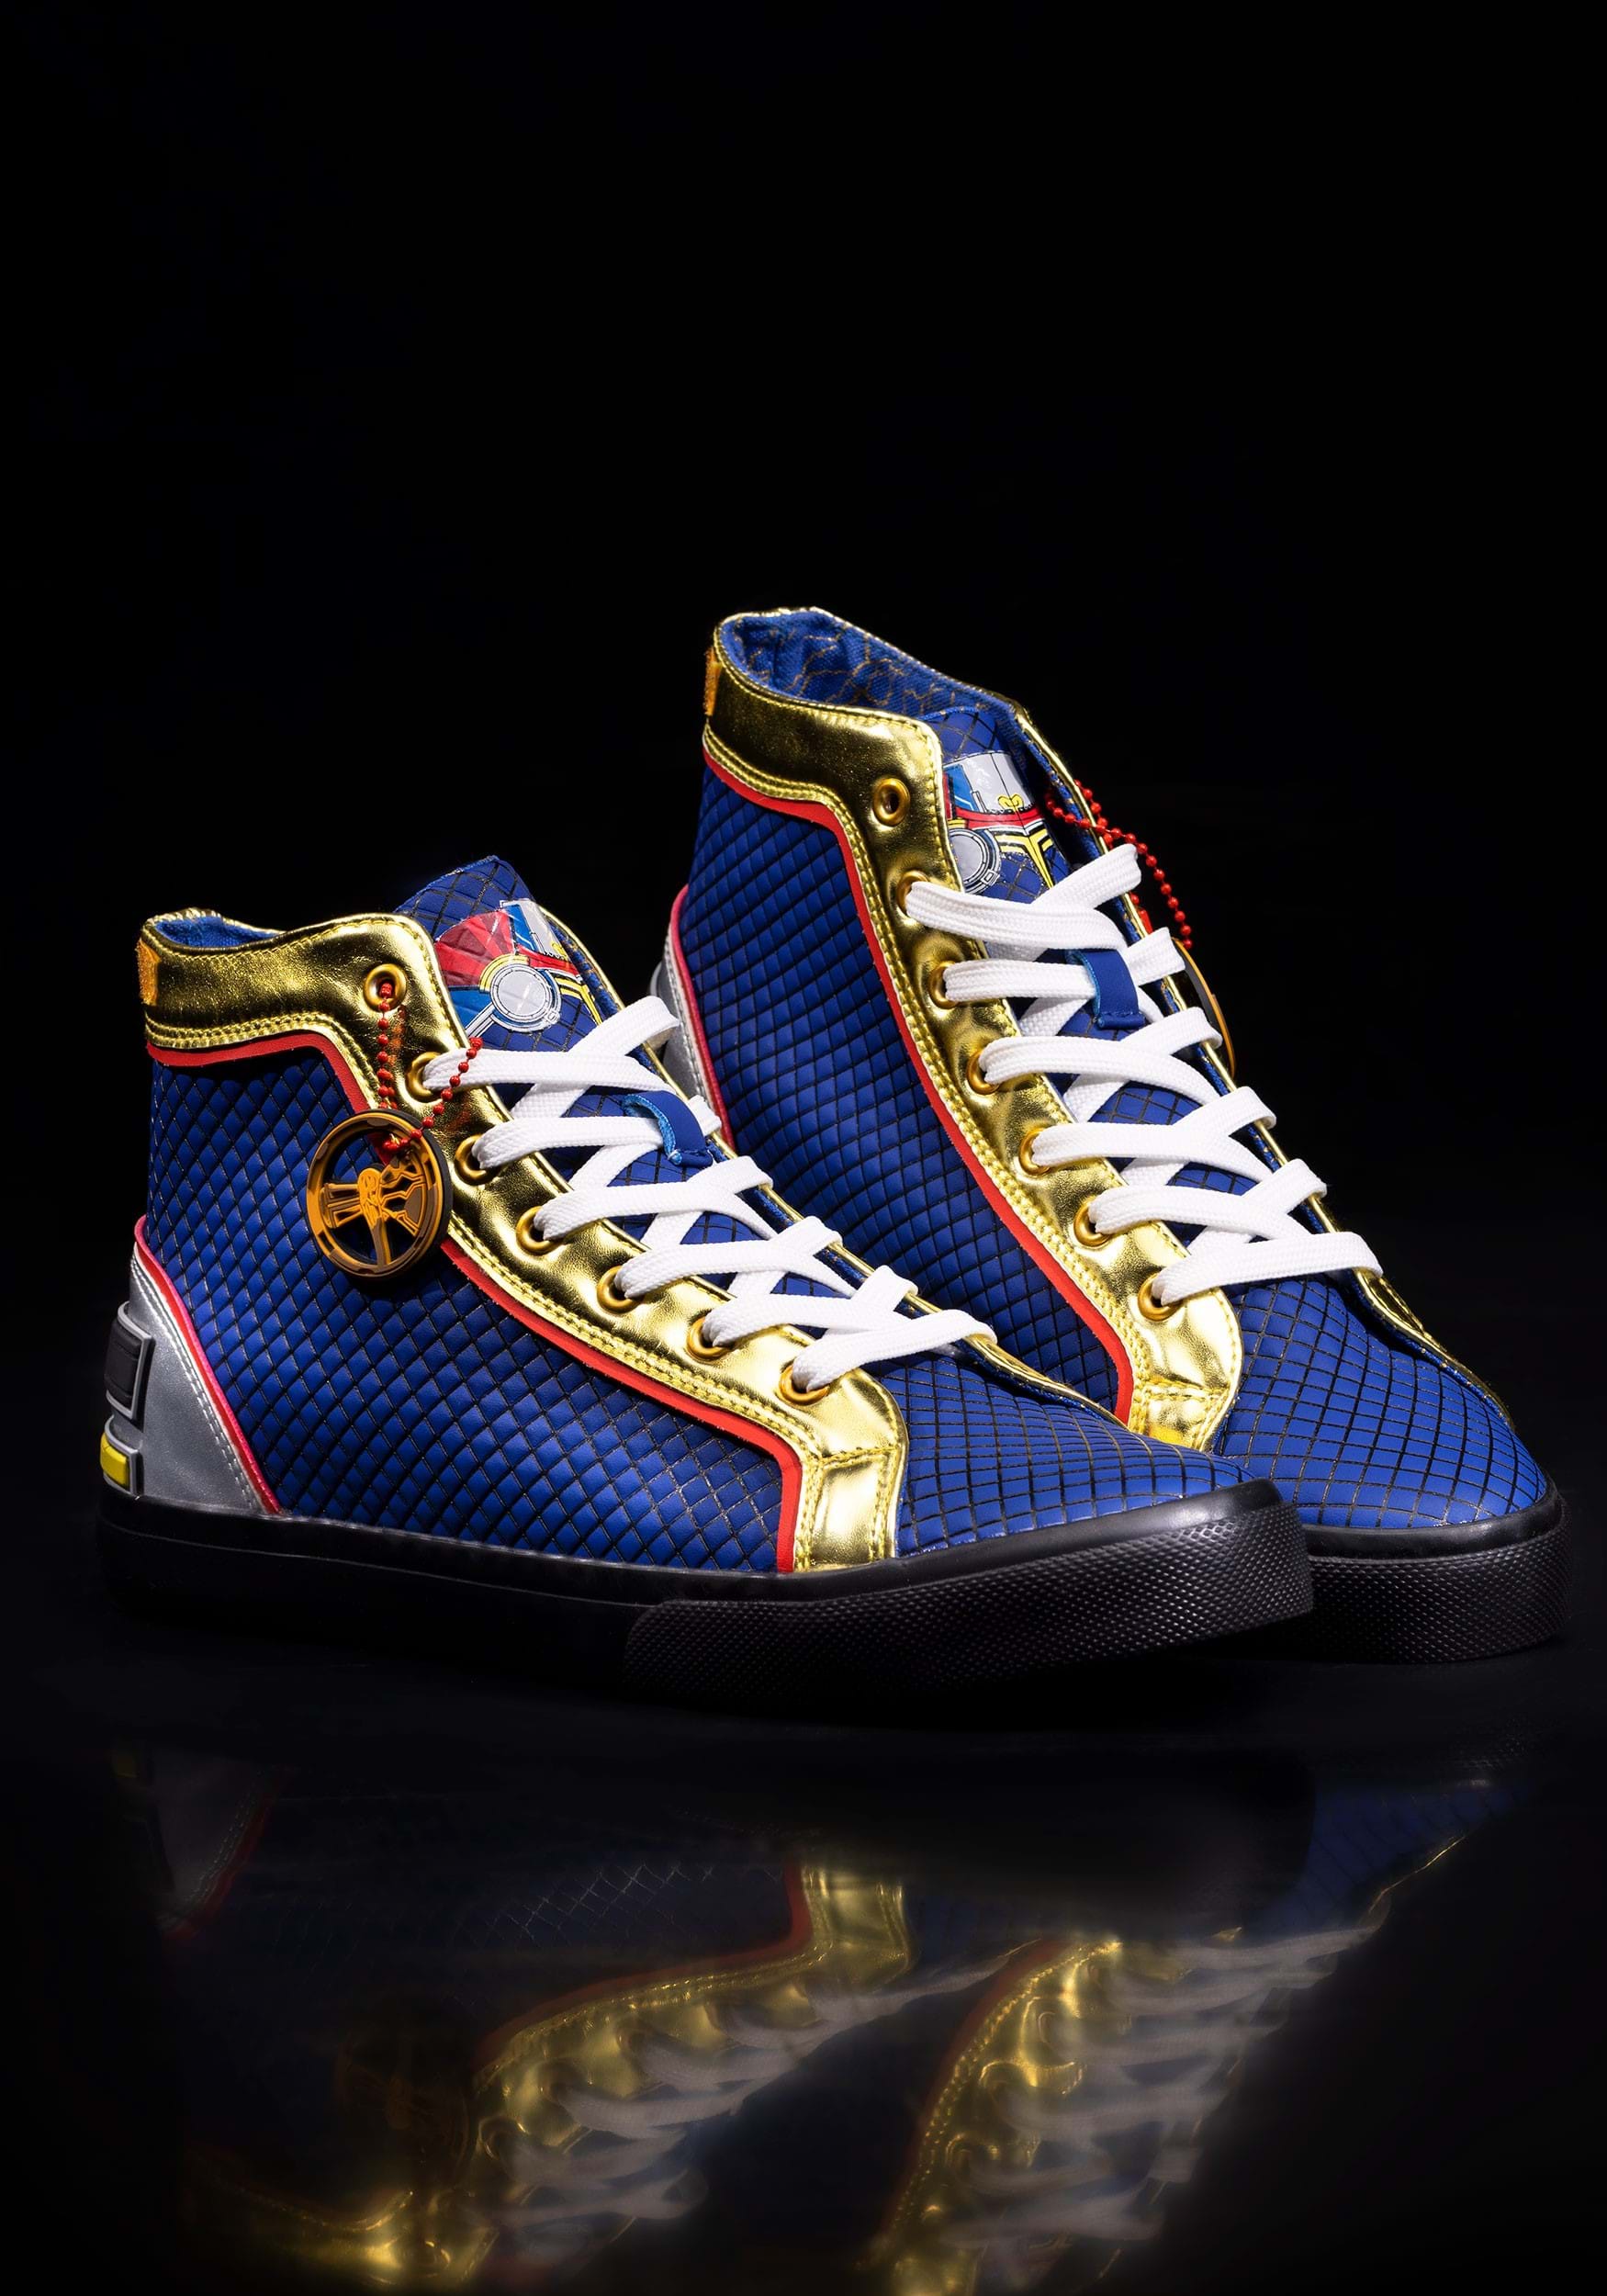 2 Chainz's Versace Chain Reaction Sneakers Get a Release Date - XXL